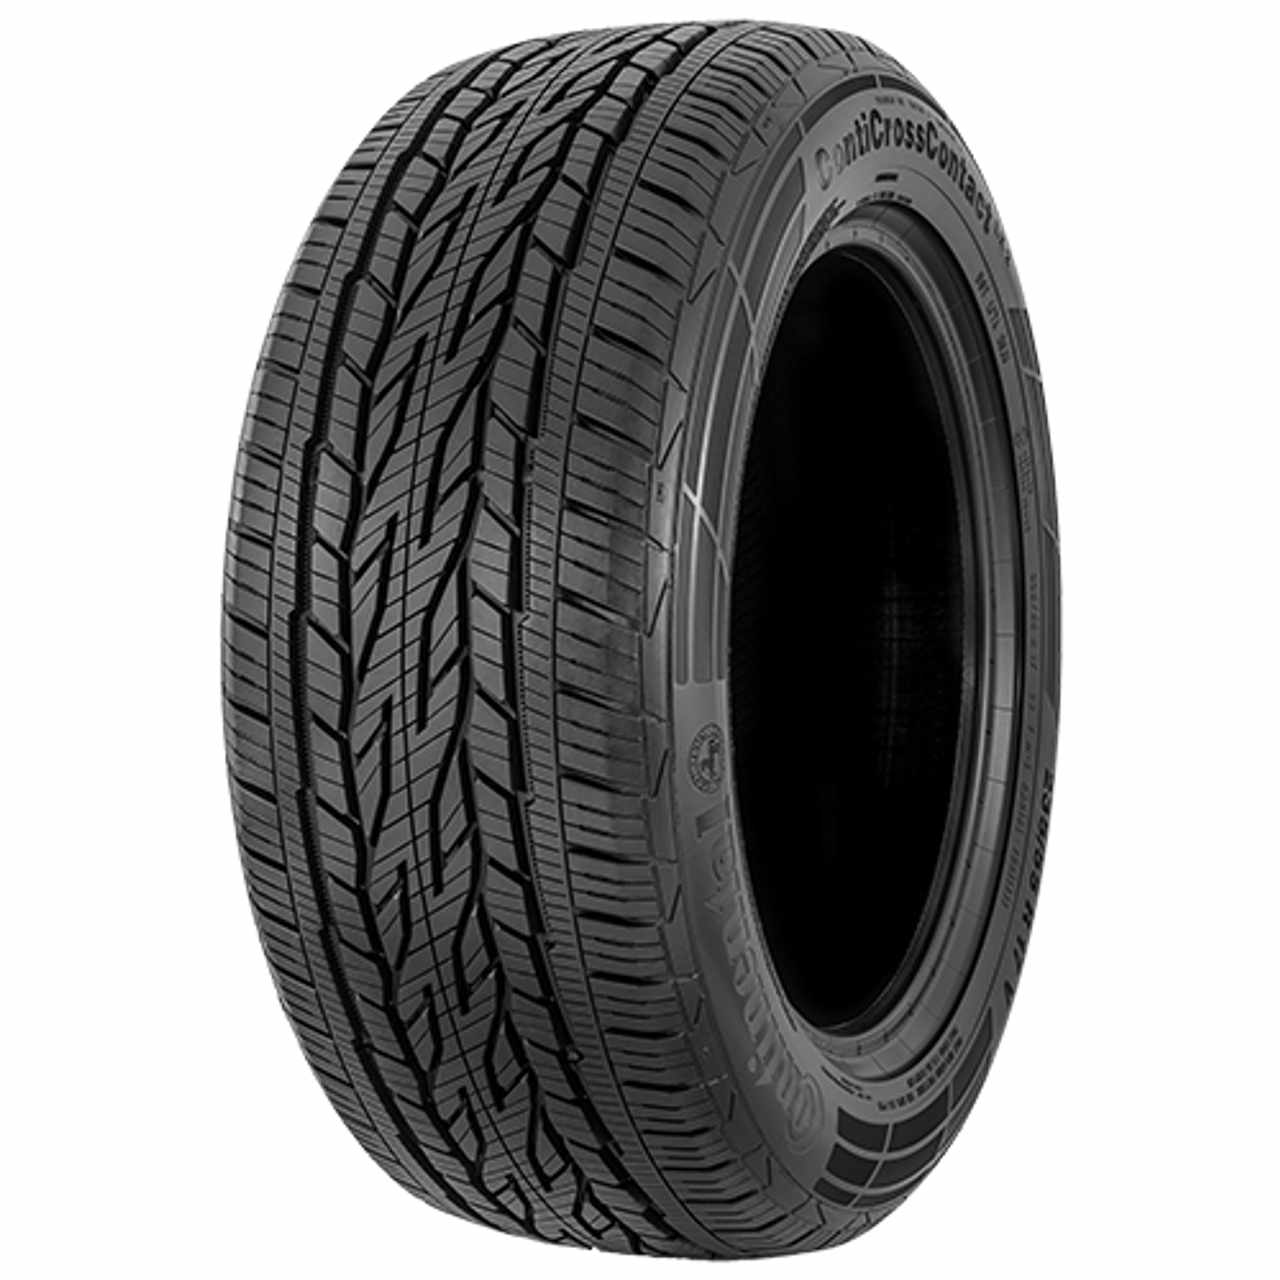 CONTINENTAL CONTICROSSCONTACT LX 2 (EVc) 275/60R20 119H FR BSW von Continental